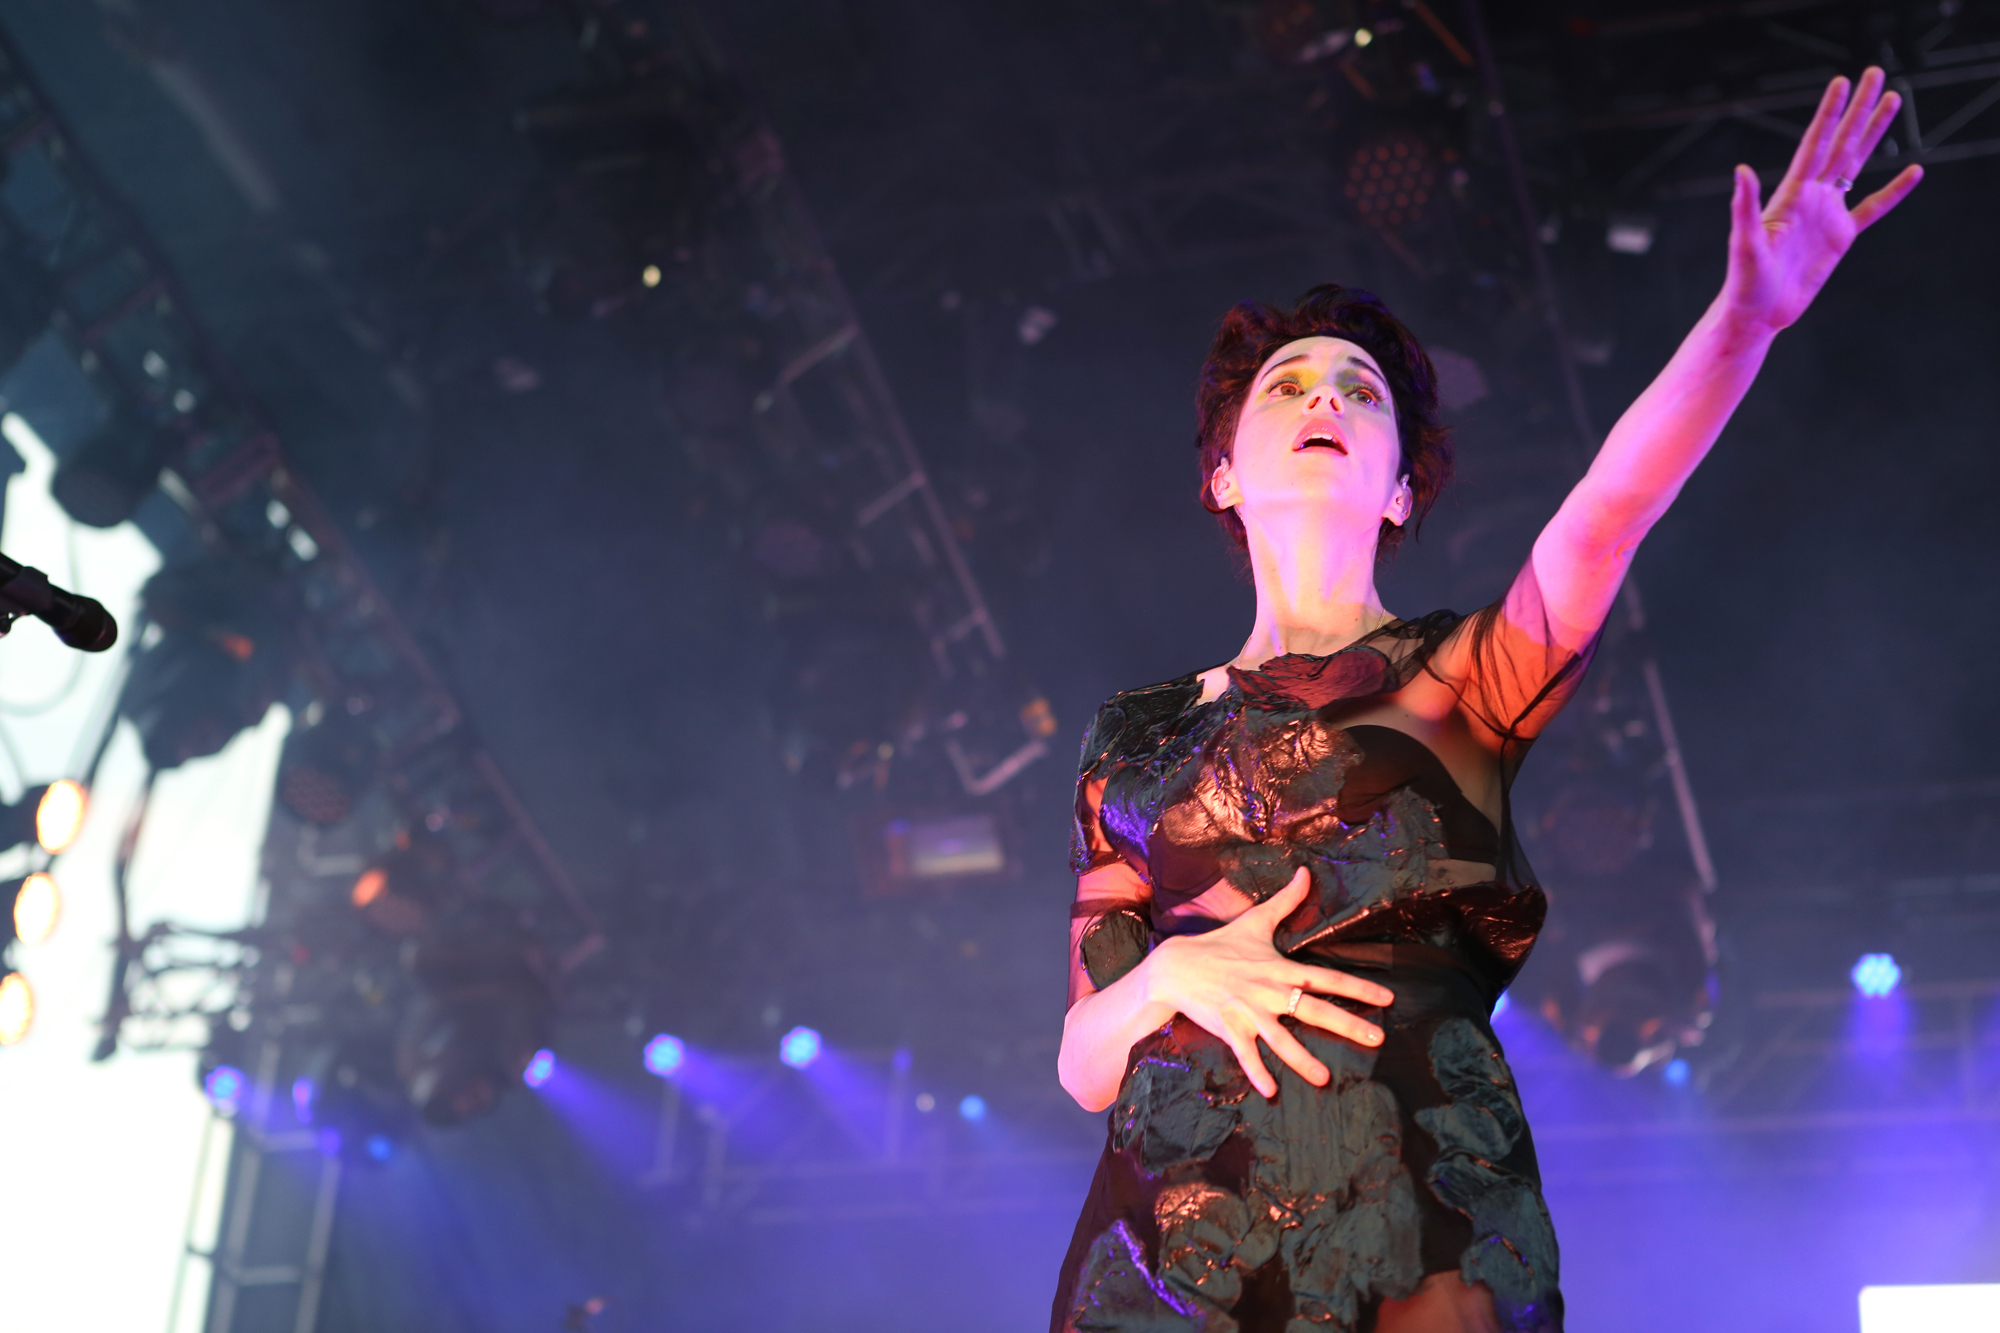 St. Vincent's Annie Clark performs on the Big Apple Stage at Governors Ball on Randall's Island, New York, on June 5, 2015. (© Michael Katzif – Do not use or republish without prior consent.)